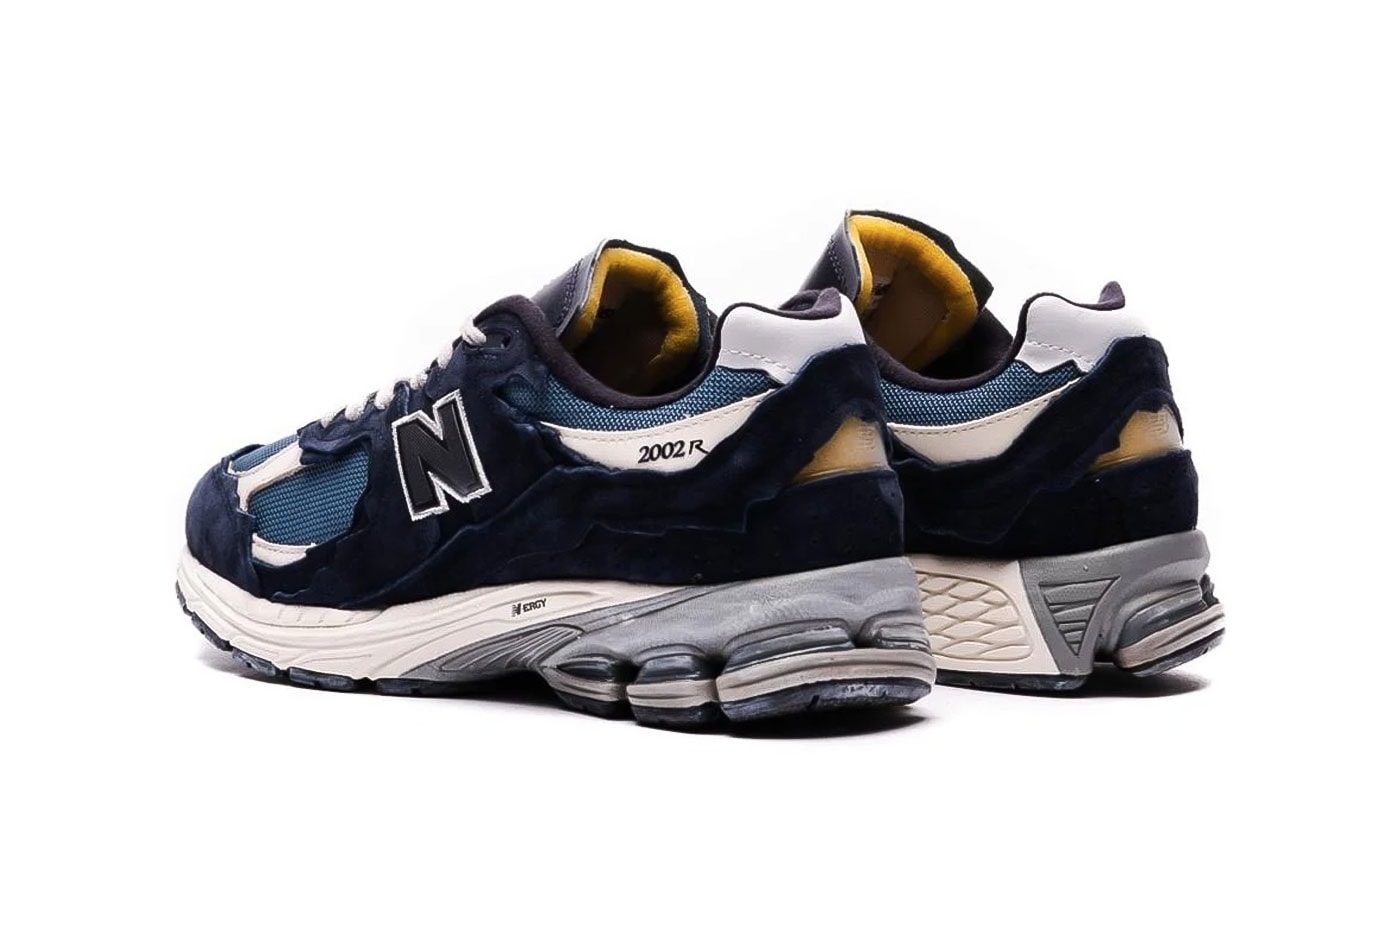 New Balance 2002R Protection Pack Refined Future north america september 29 private label extra butter wabi sabi mirage grey dark navy vintage orange release info date price